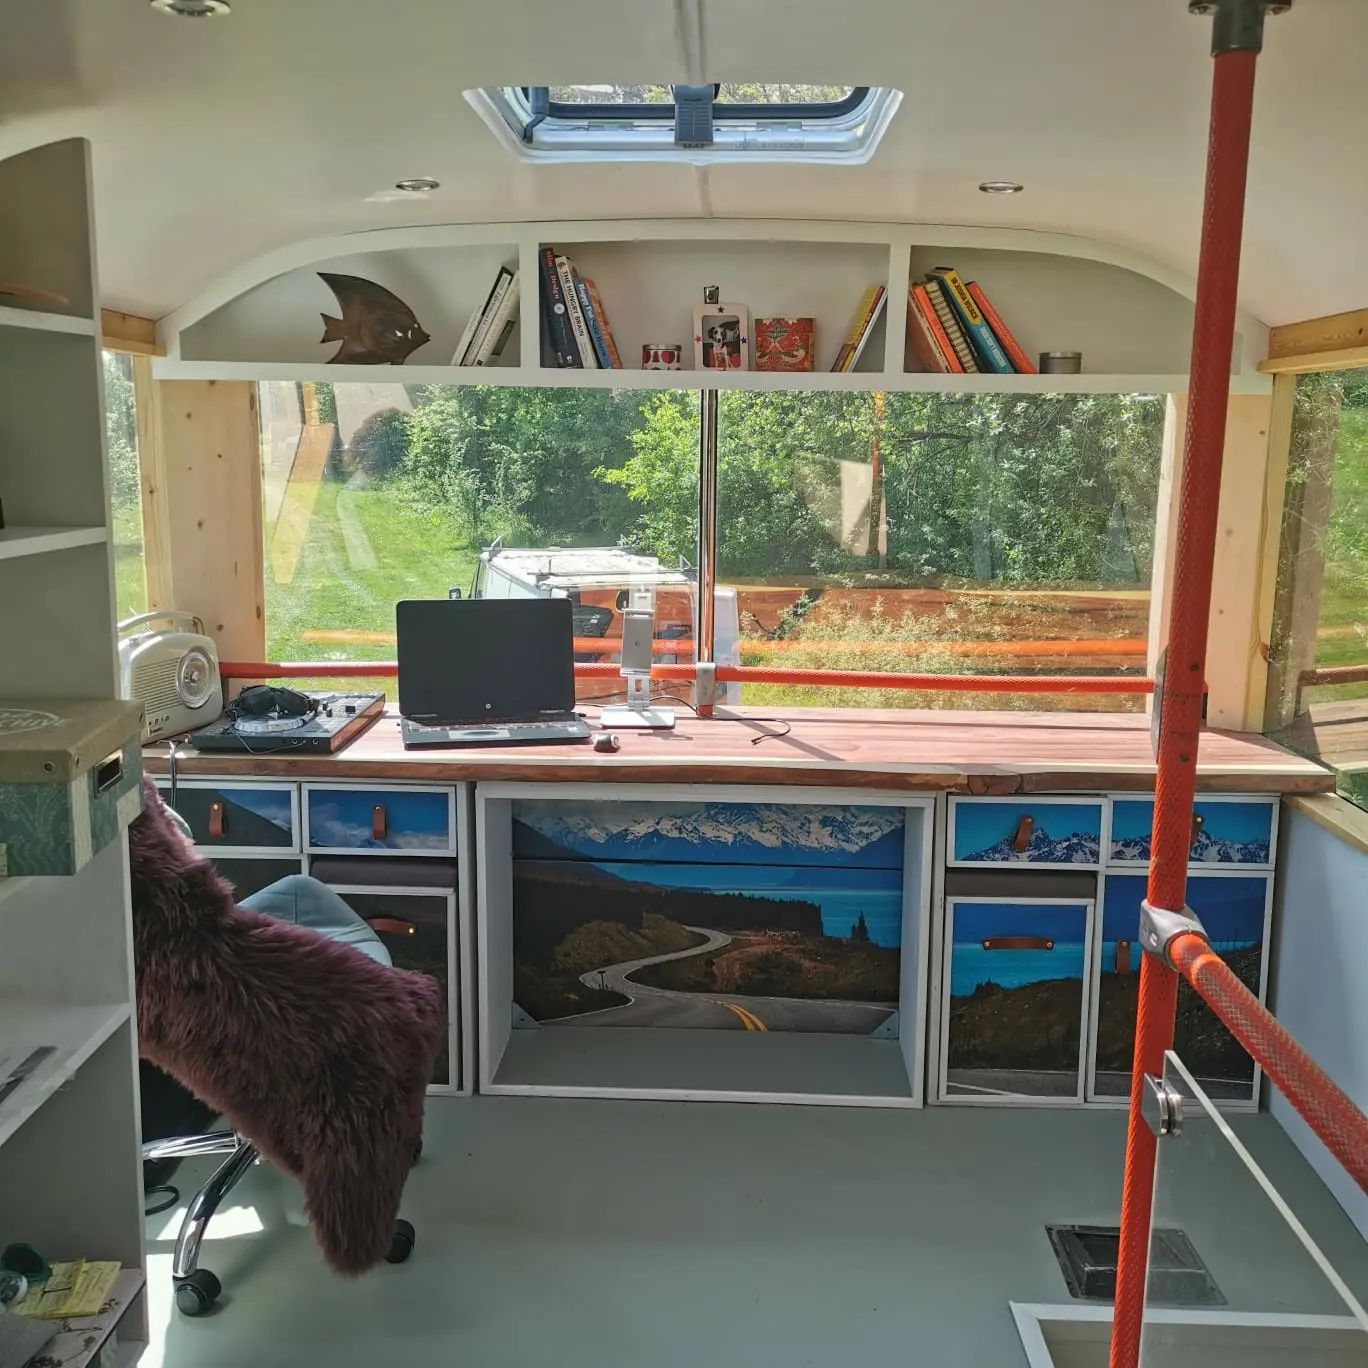 driven to diy: 'we converted a 1997 double decker school bus into an off-grid living space for £28,000'